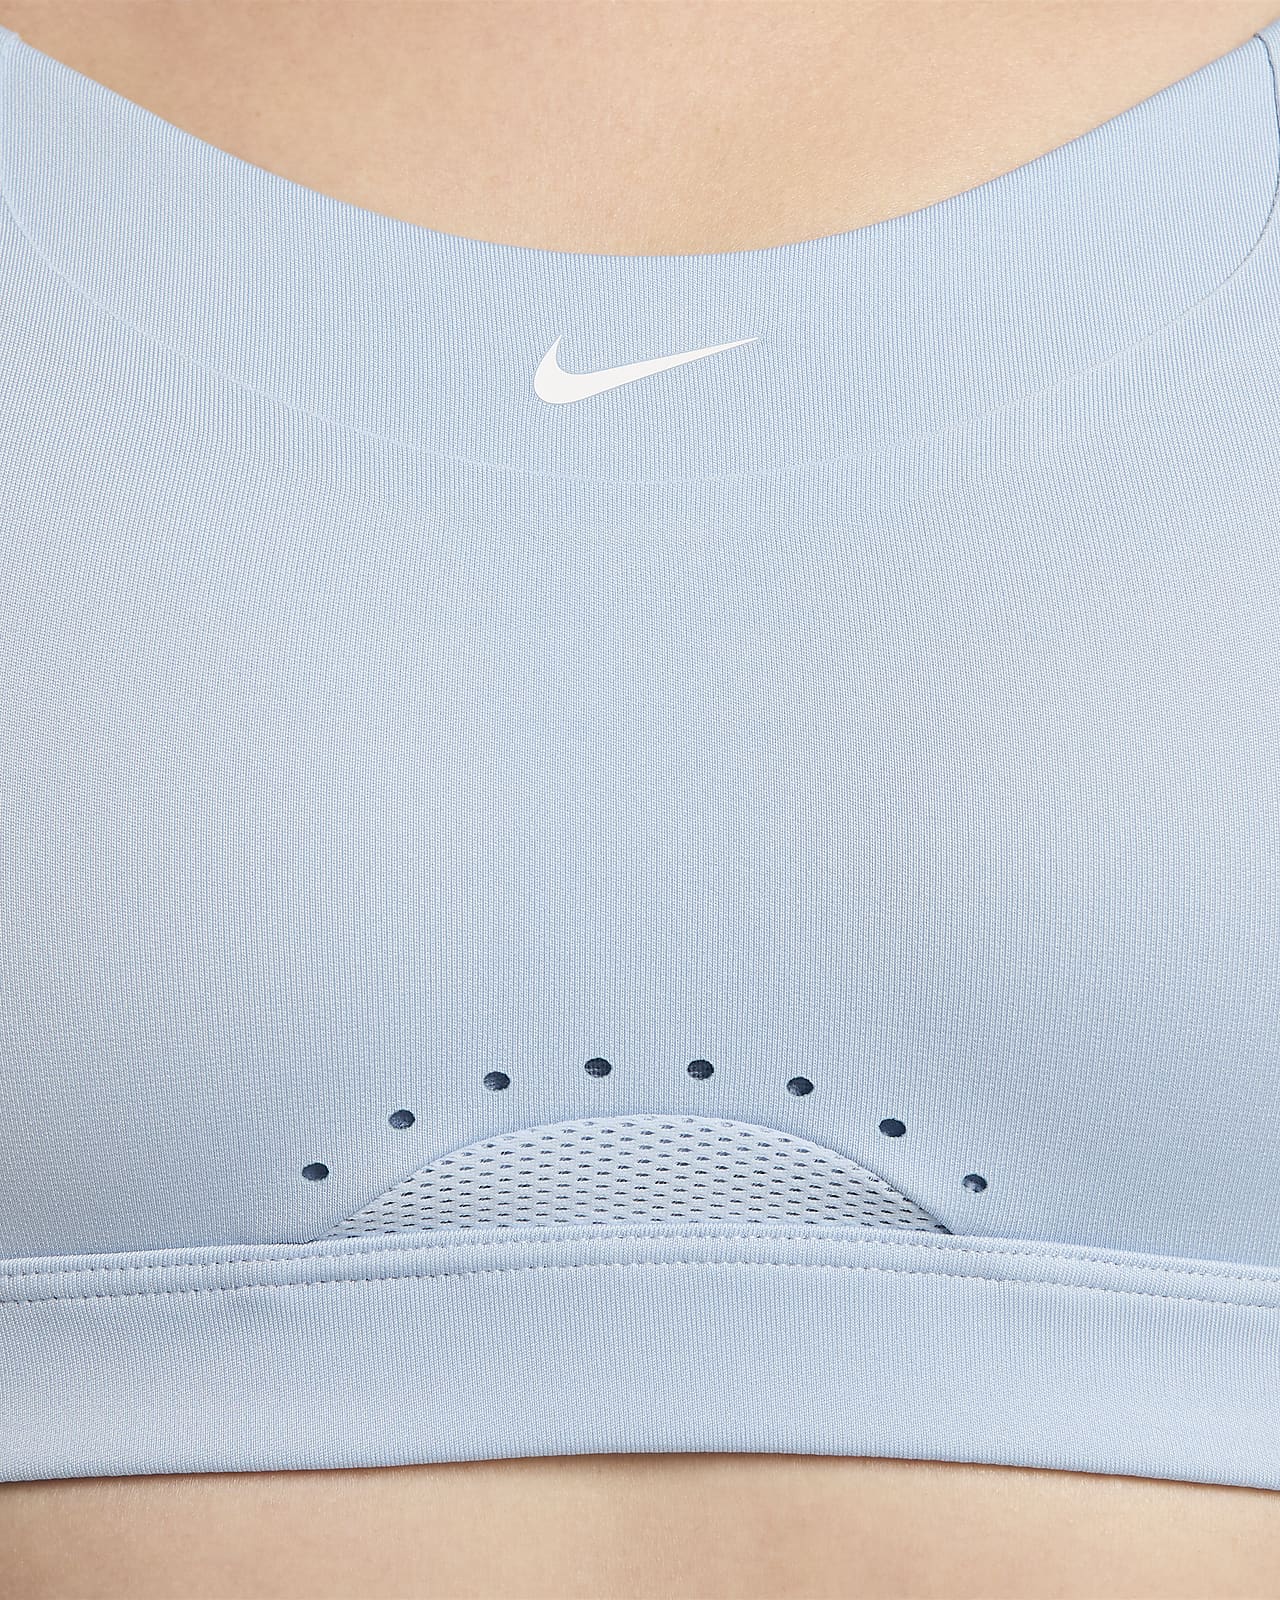 NEW NIKE [S (A-C)] Women's ALPHA High Support Sports Bra-Atmosphere  DD0436-610